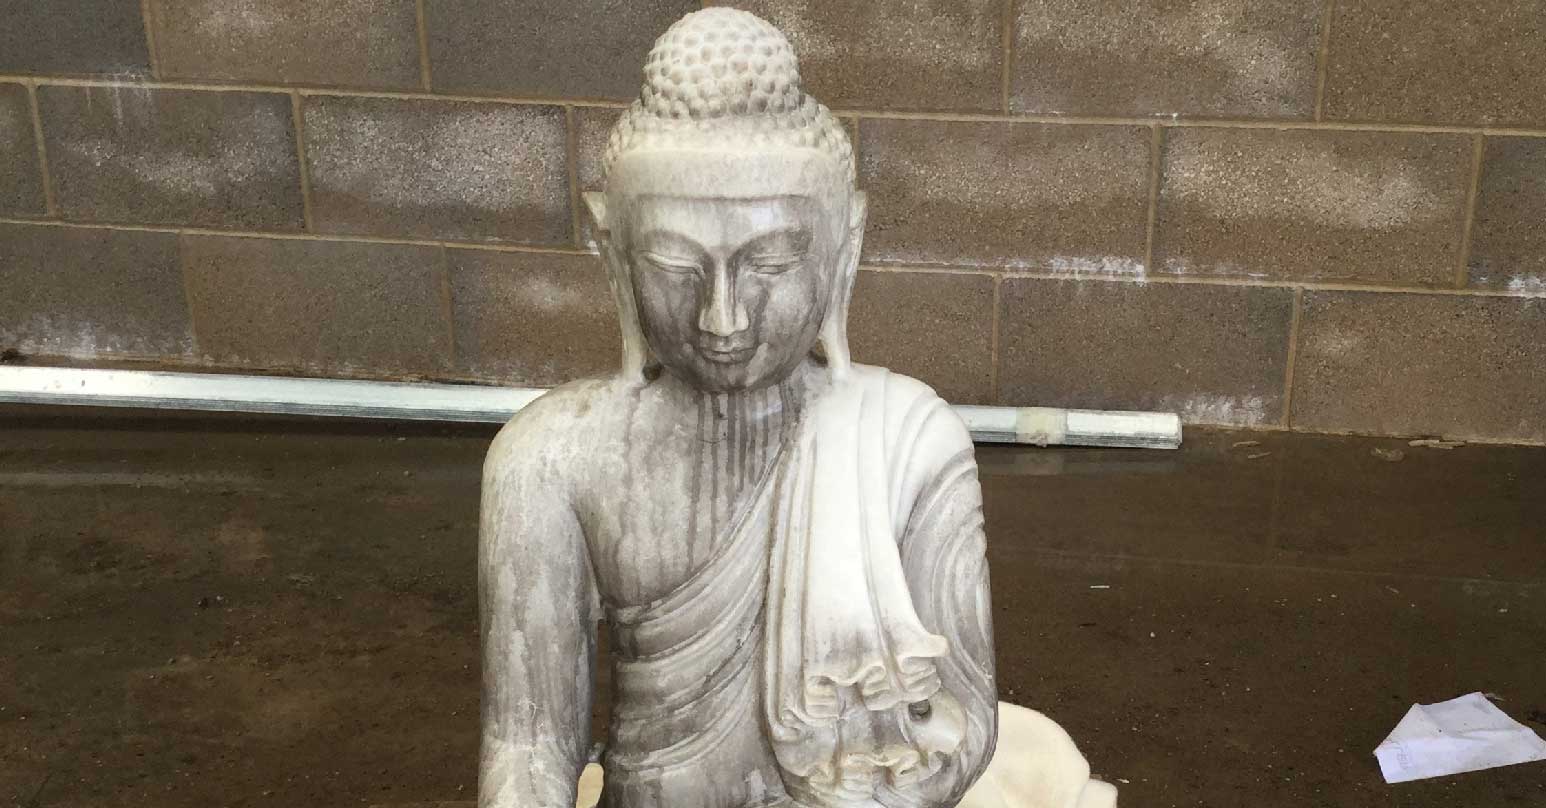 Stained Budda statue - Before repair